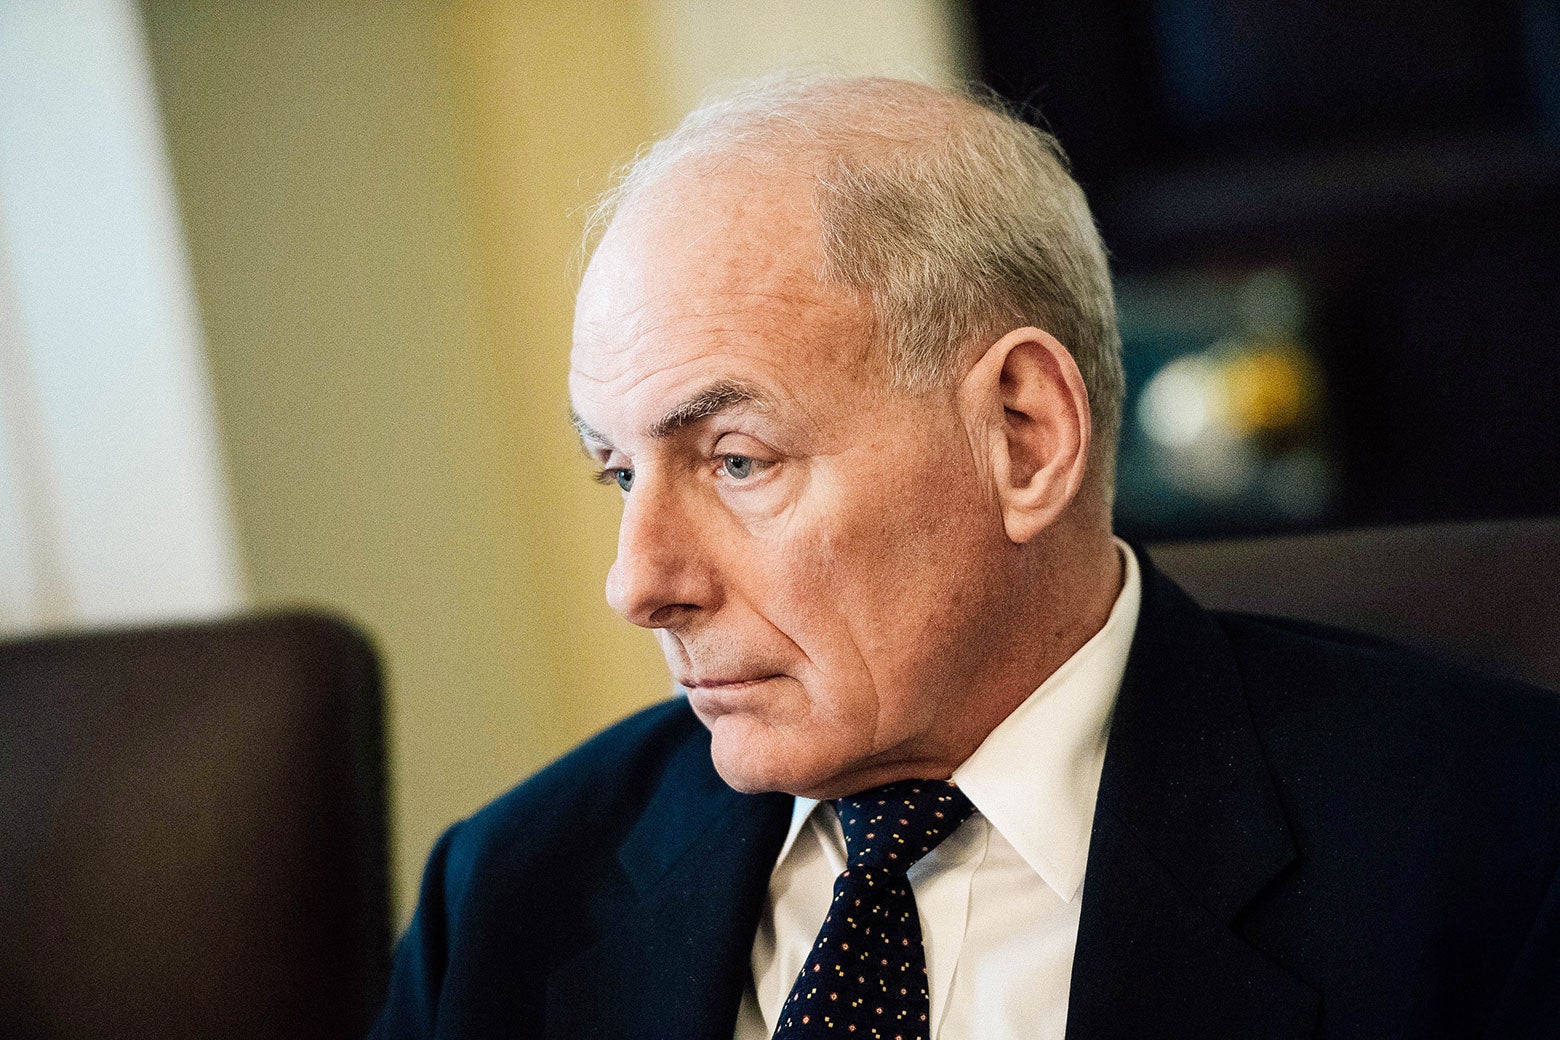 White House Chief of Staff John Kelly attends a Cabinet meeting with President Donald Trump at the White House on Nov. 20.